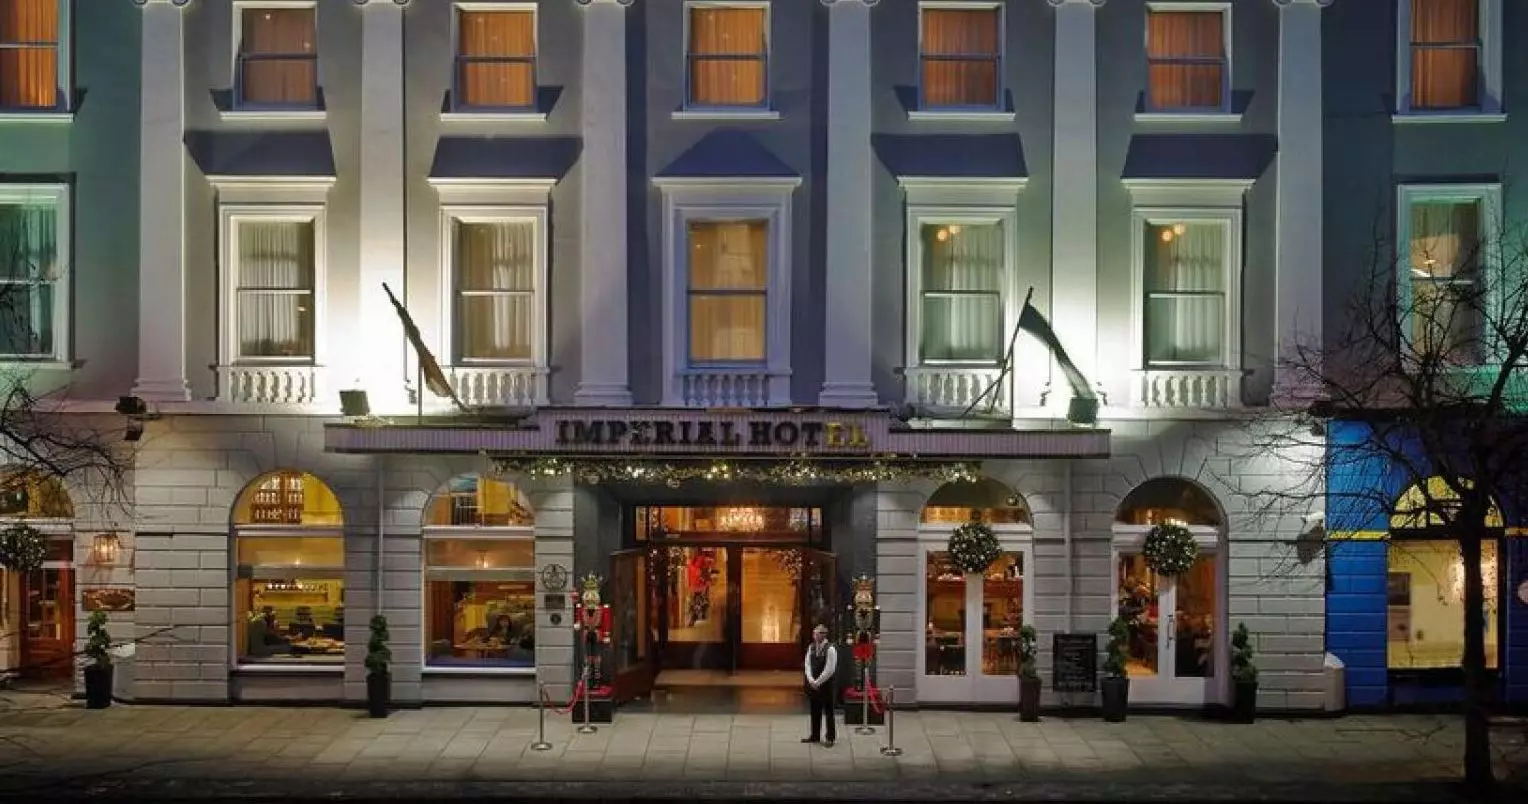 Four-Star Imperial Hotel in Cork.